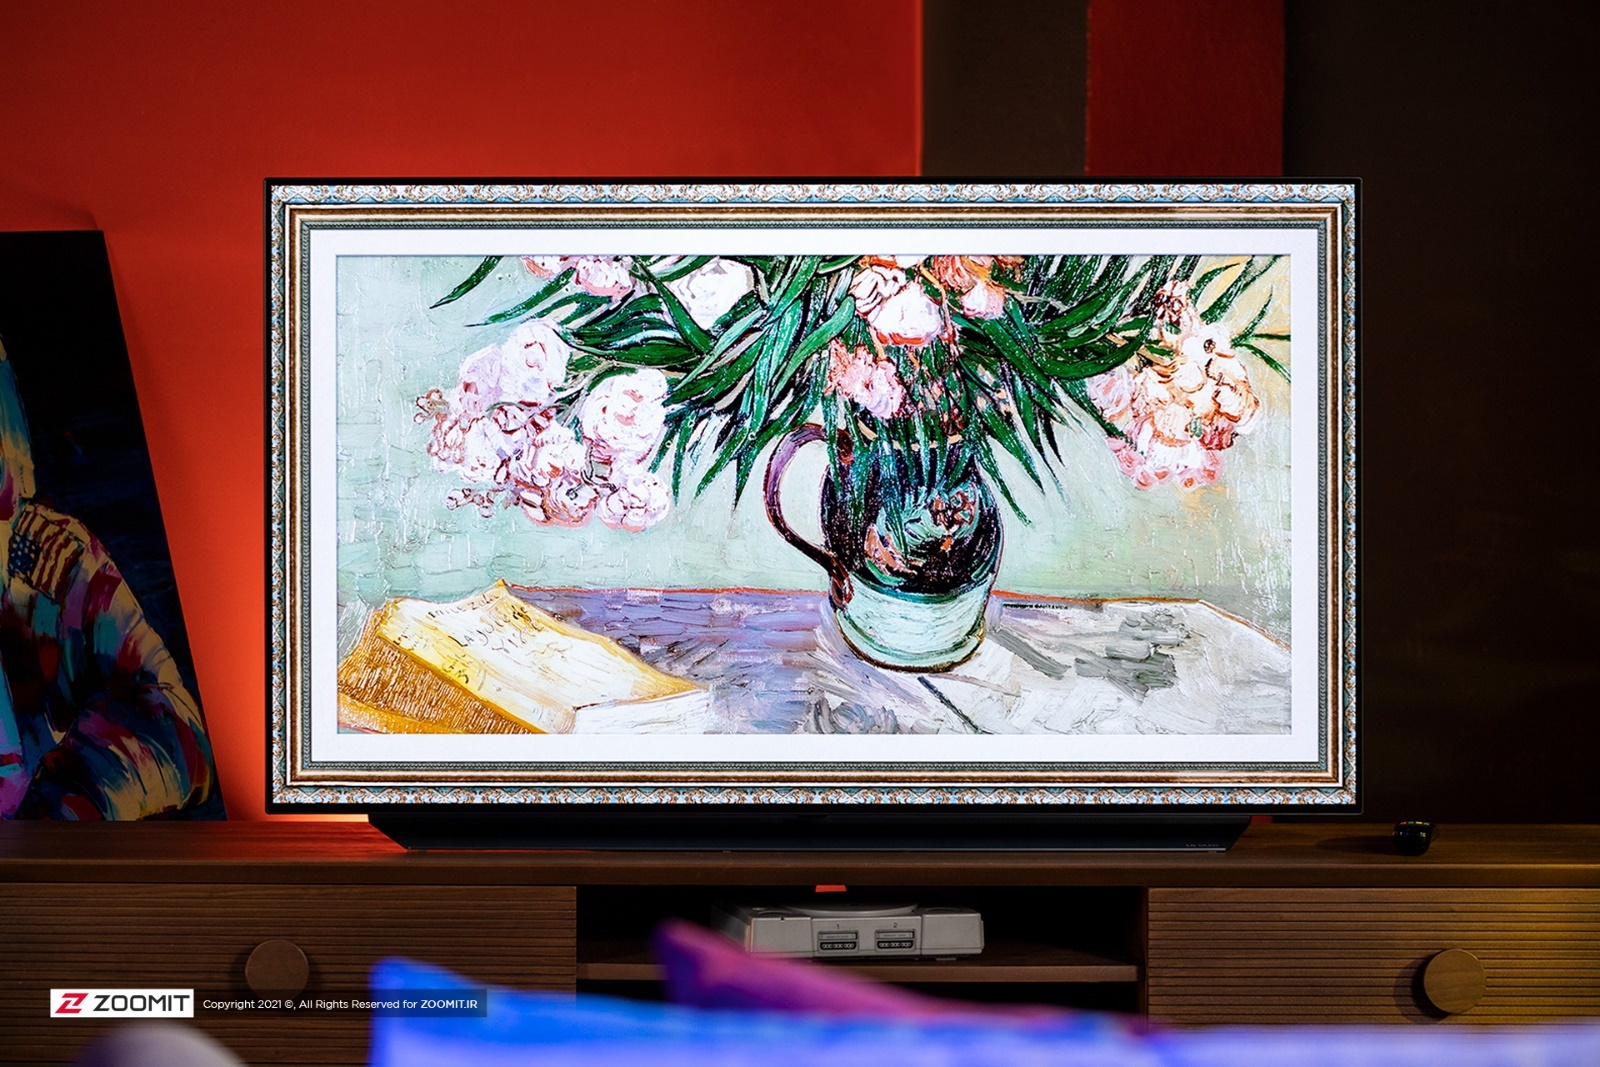 Overall design of the LG C1 OLED TV